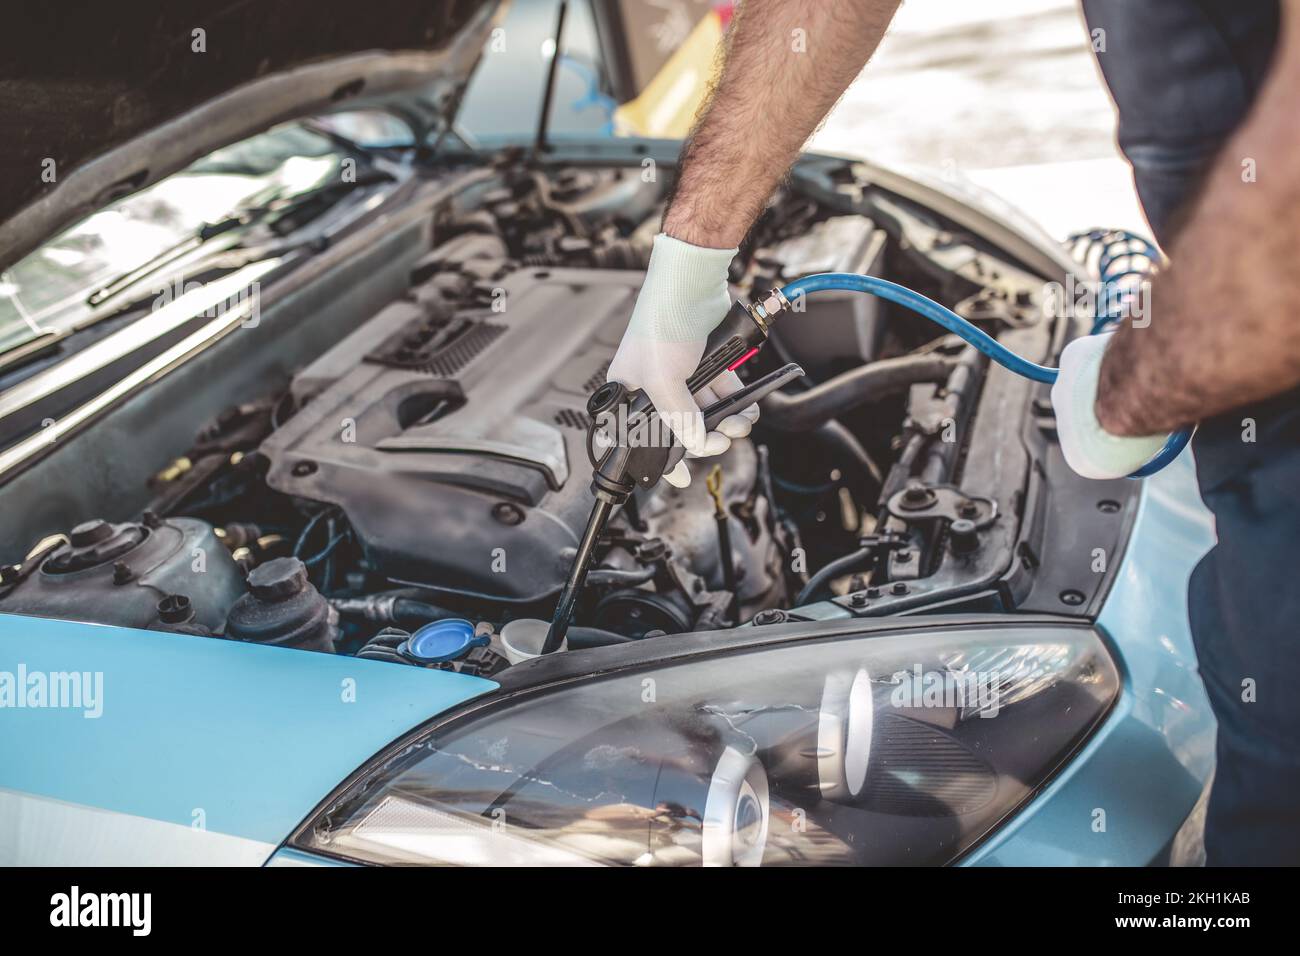 Experienced service station worker washing a customer car Stock Photo